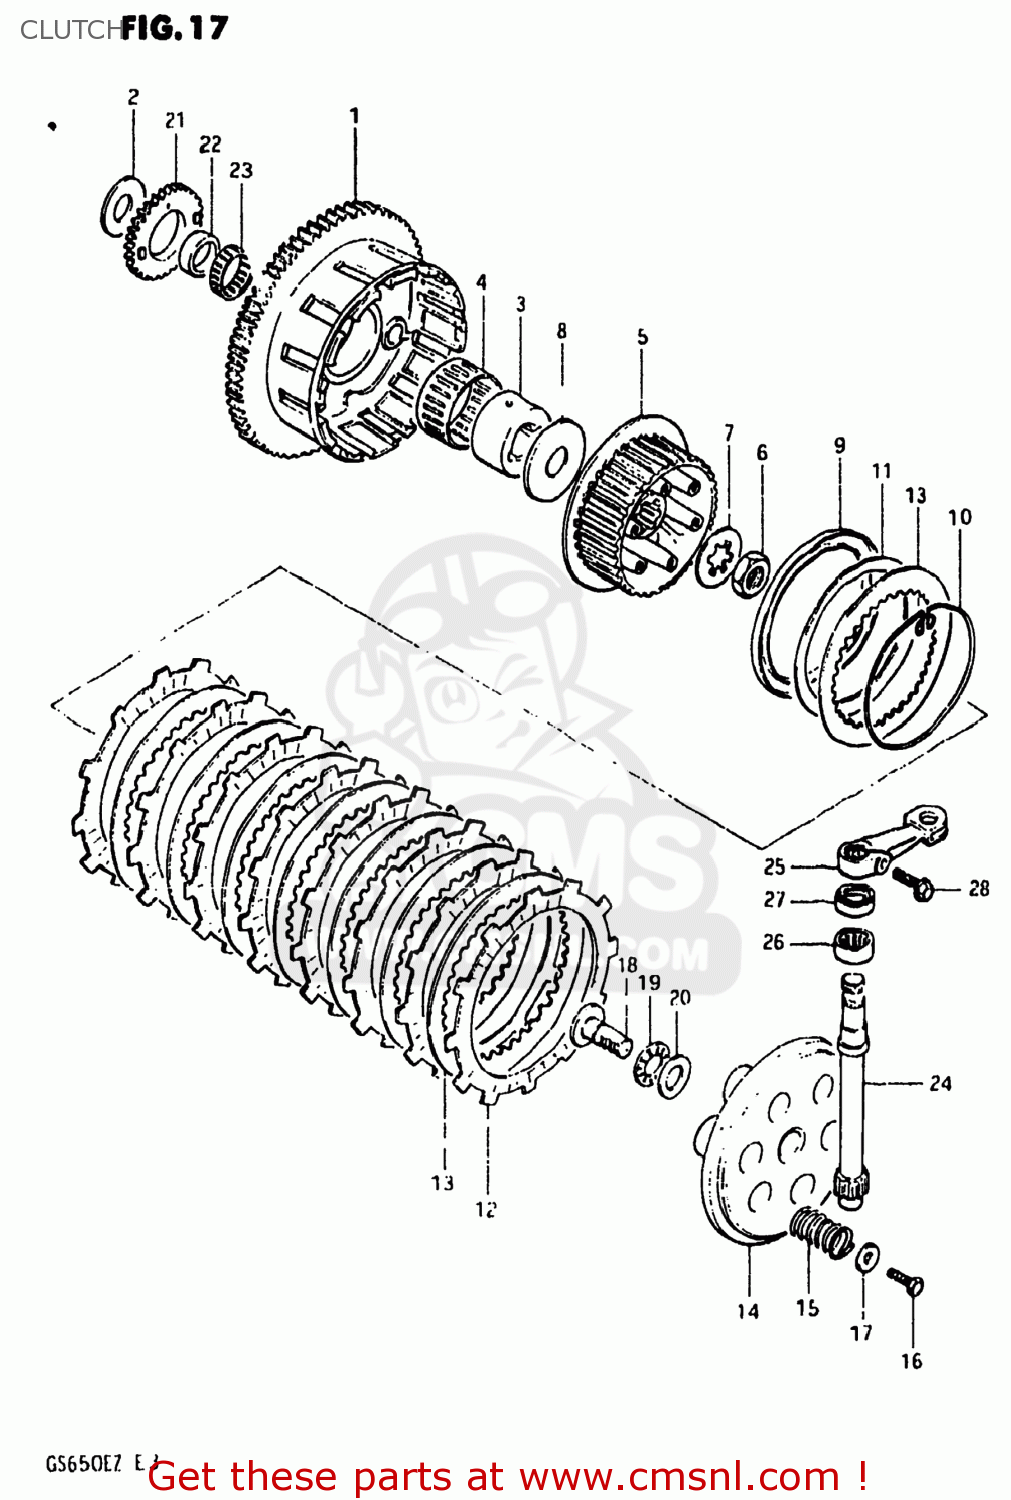 Suzuki GEAR ASSEMBLY,PRIMARY DRIVE NT:87 2120047010